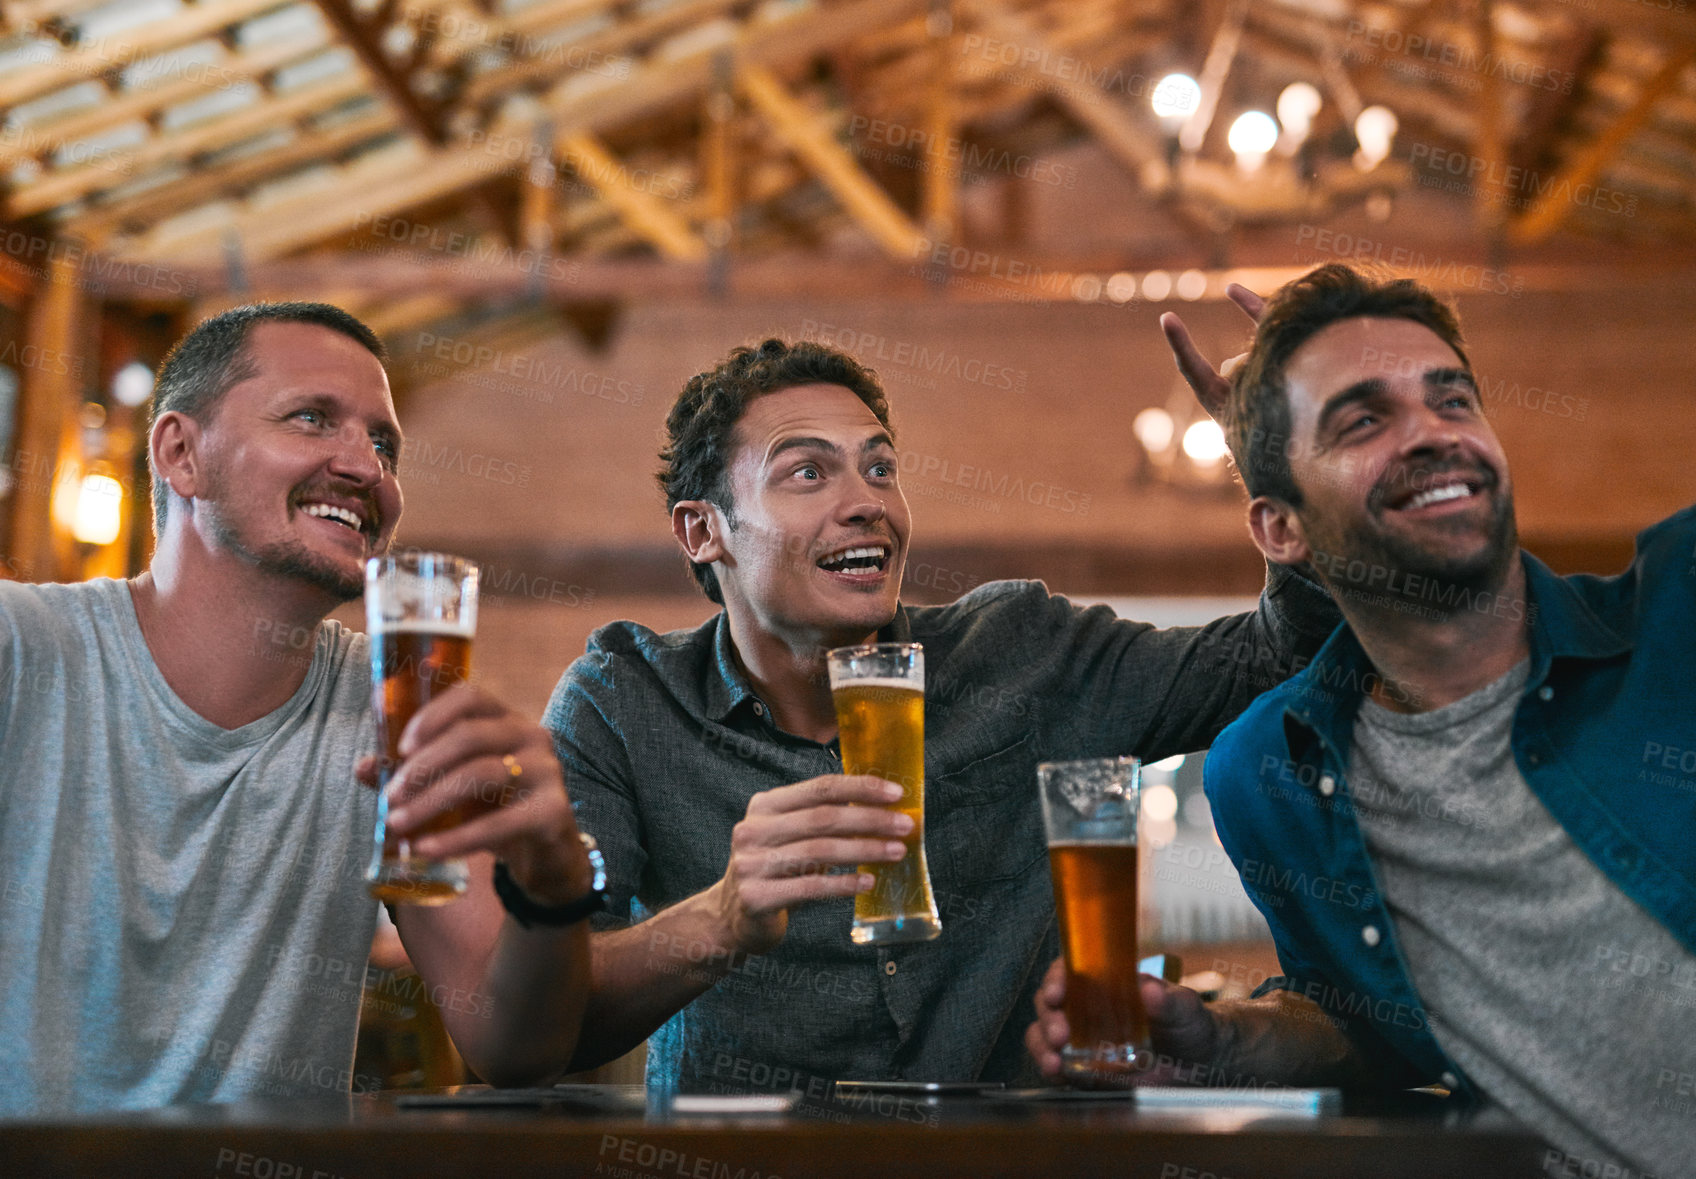 Buy stock photo Shot of three young cheerful men drinking beer at a table while taking a self portrait together inside of a beer brewery